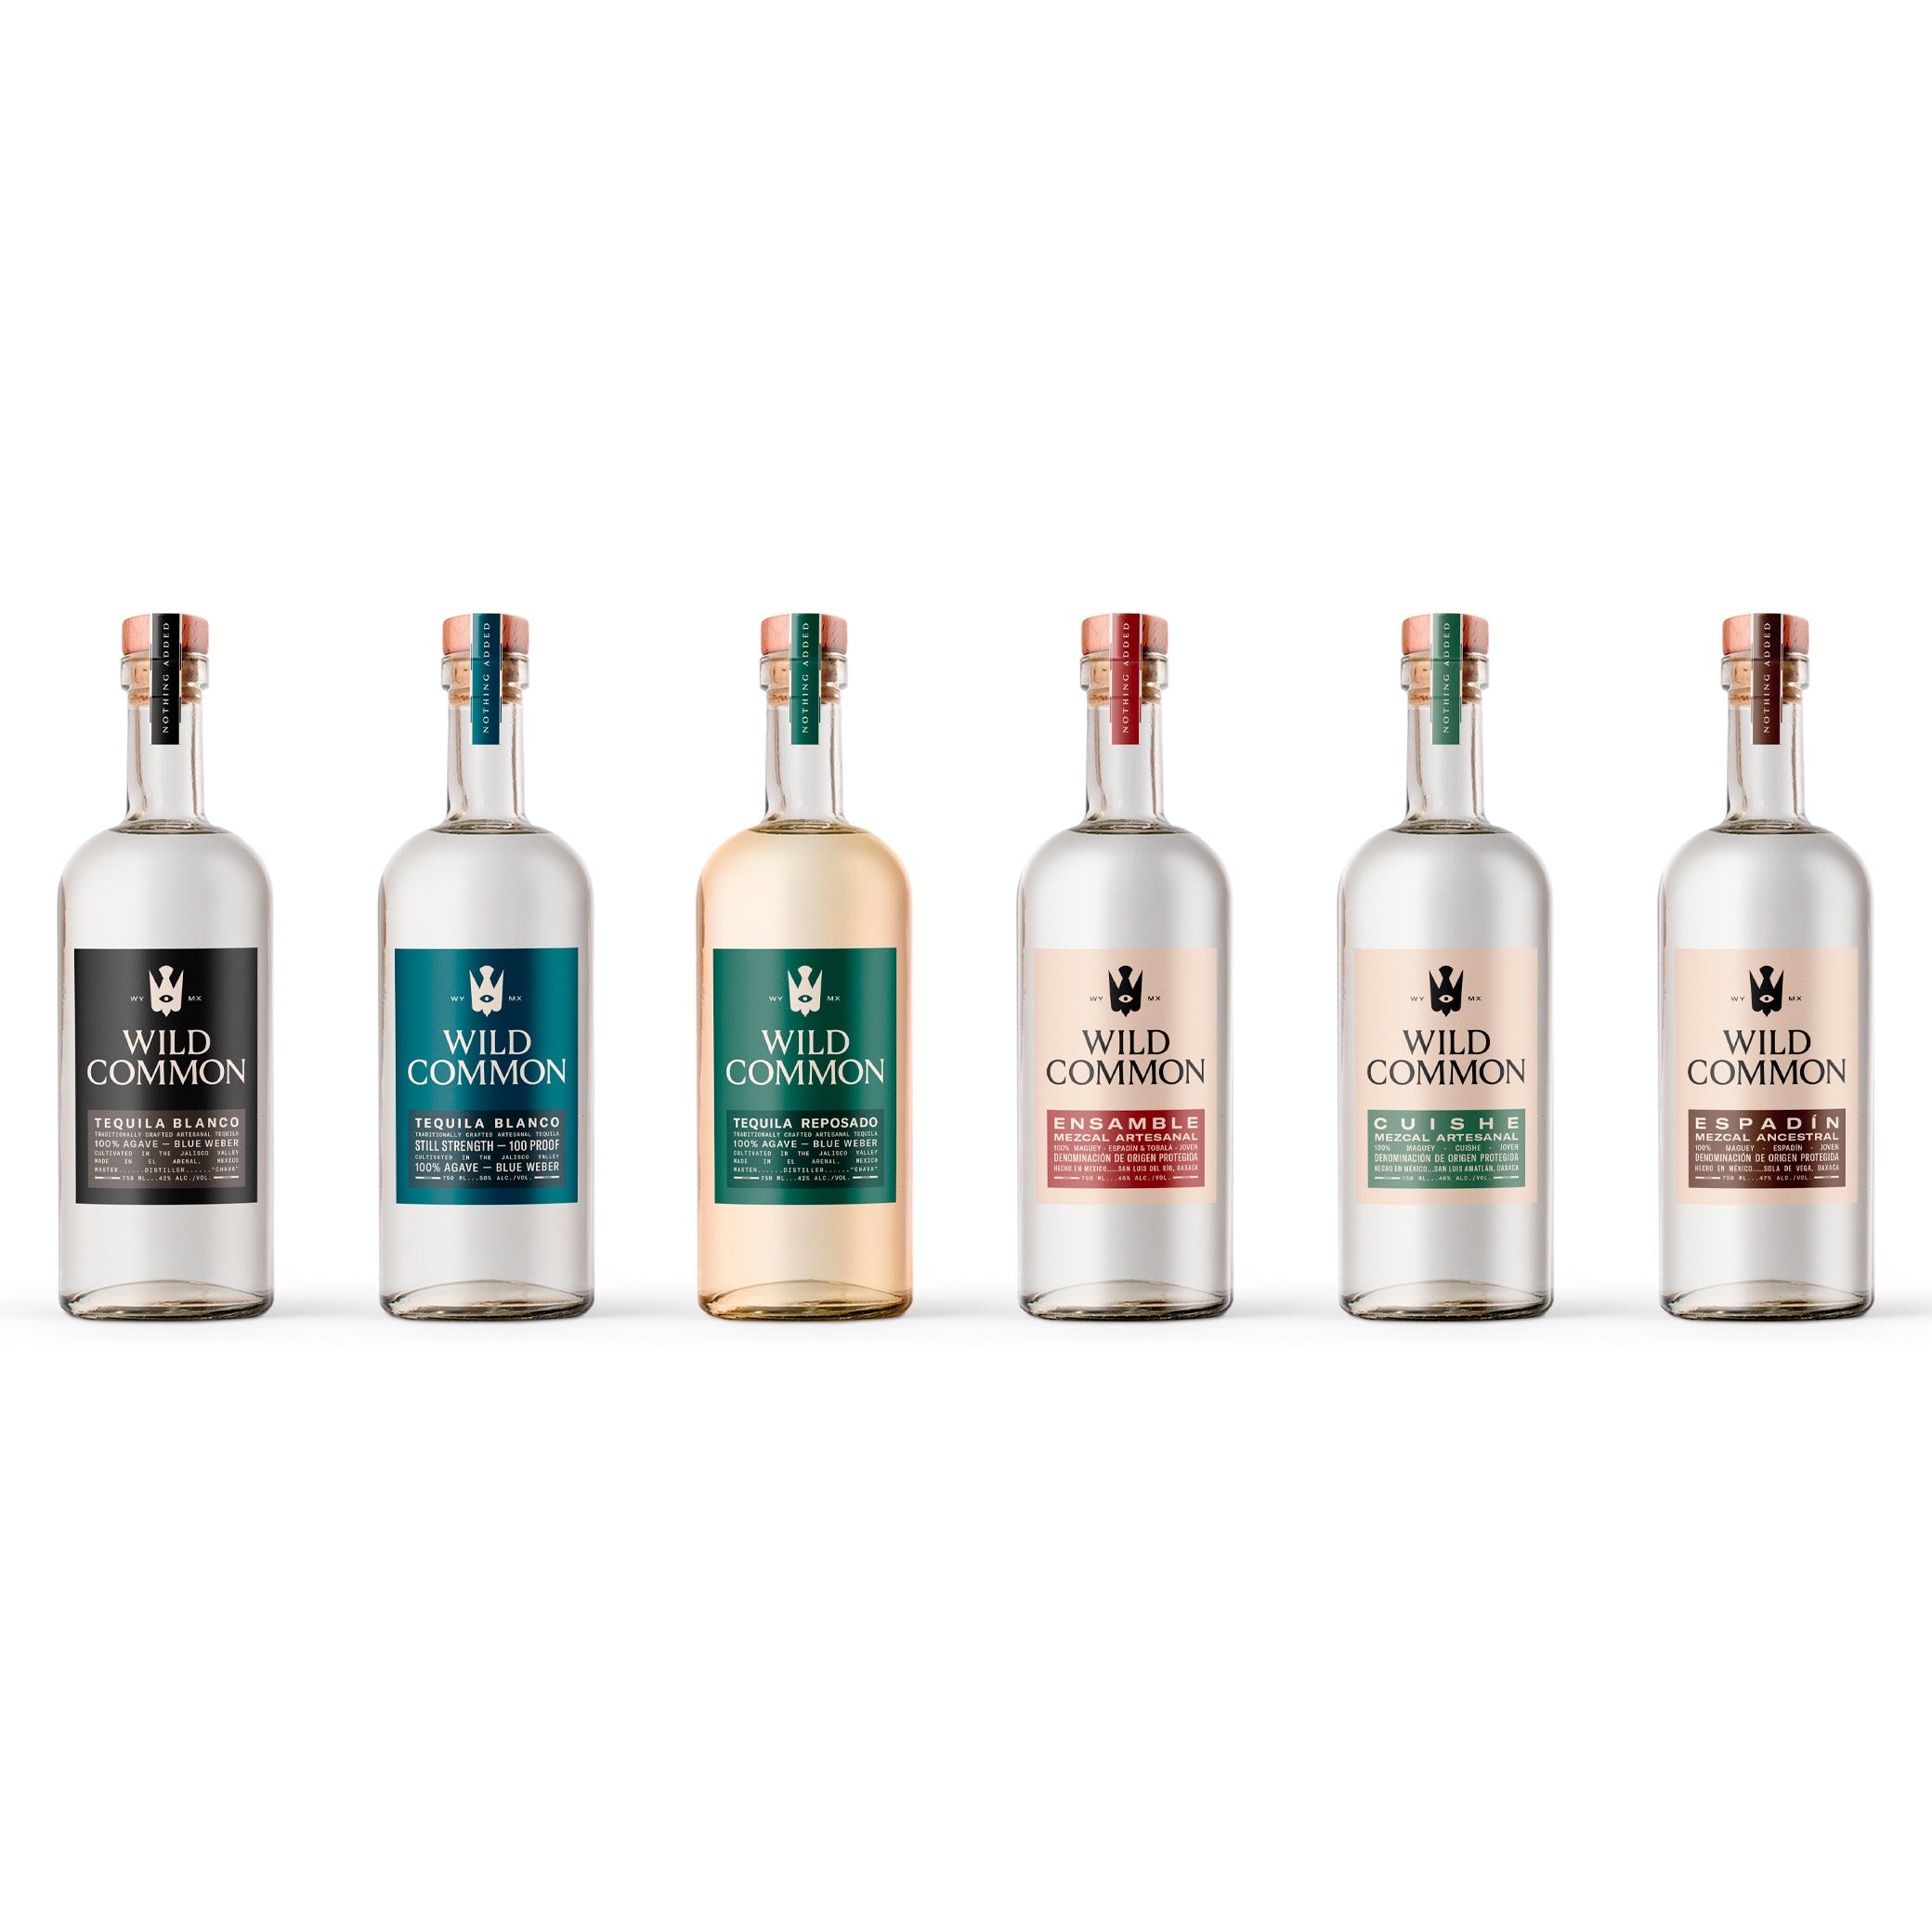 Wild Common Tequila & Mezcal Collection